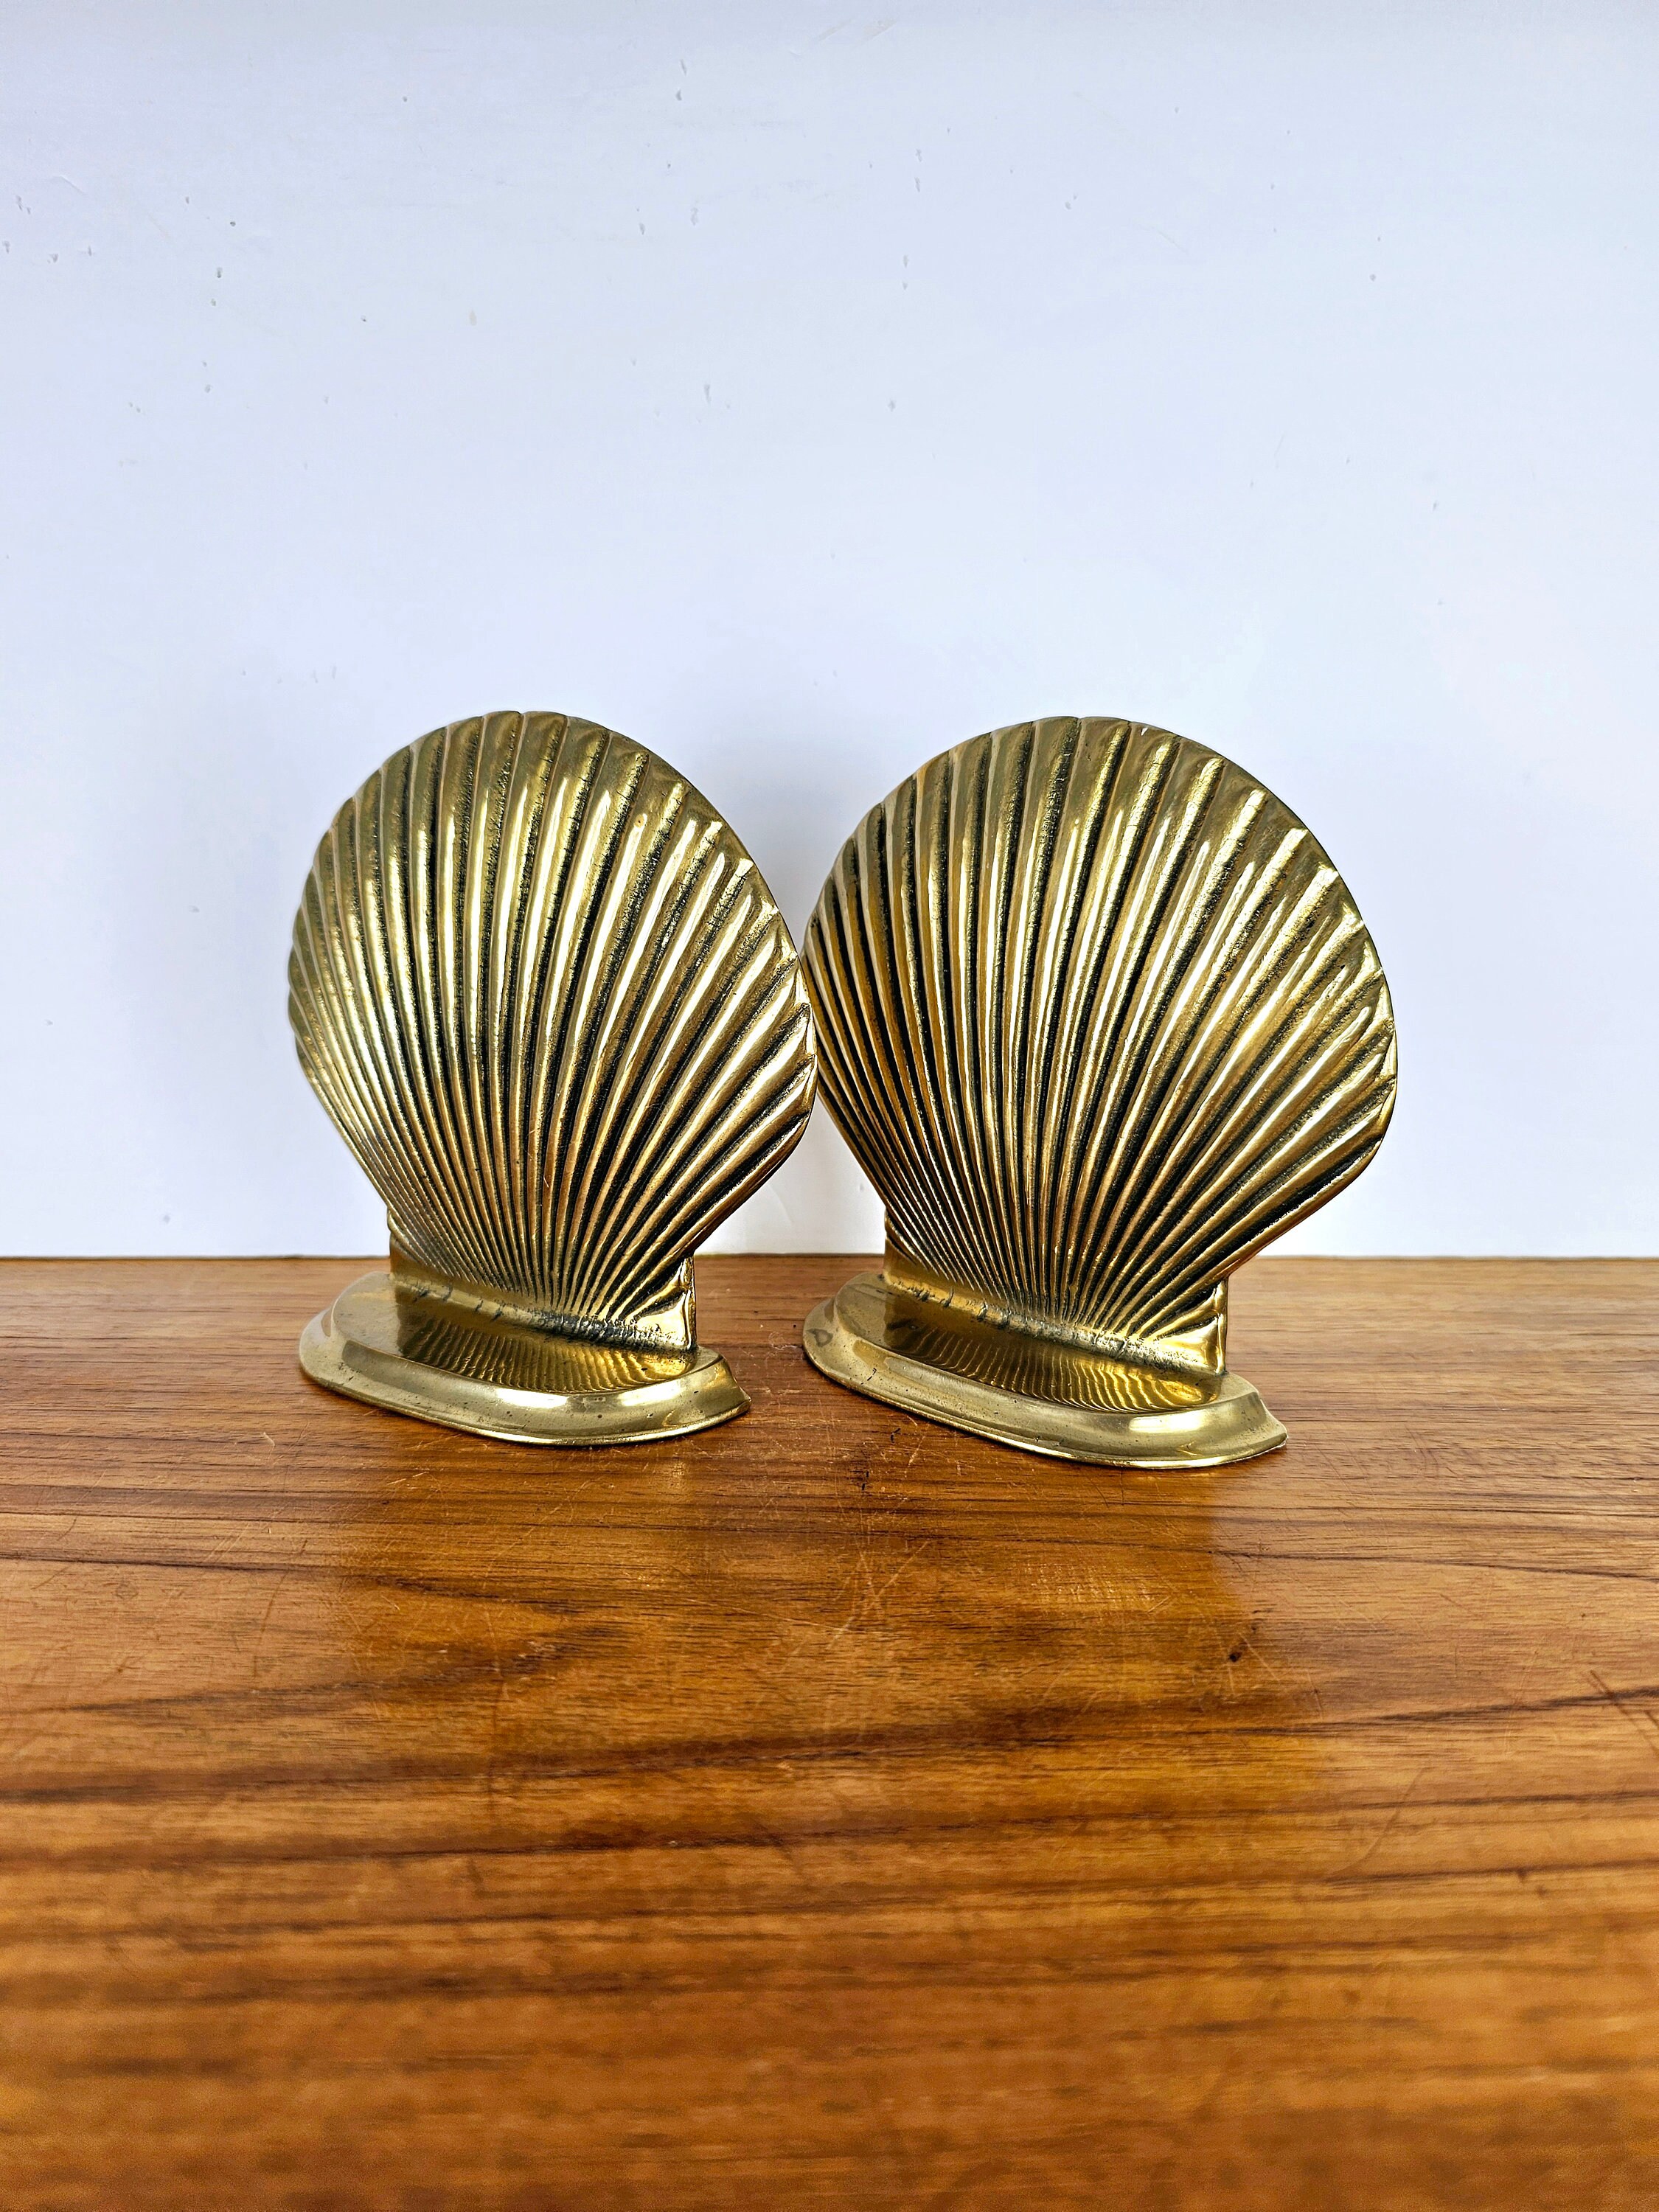 Brass Shell Bookends -  Canada